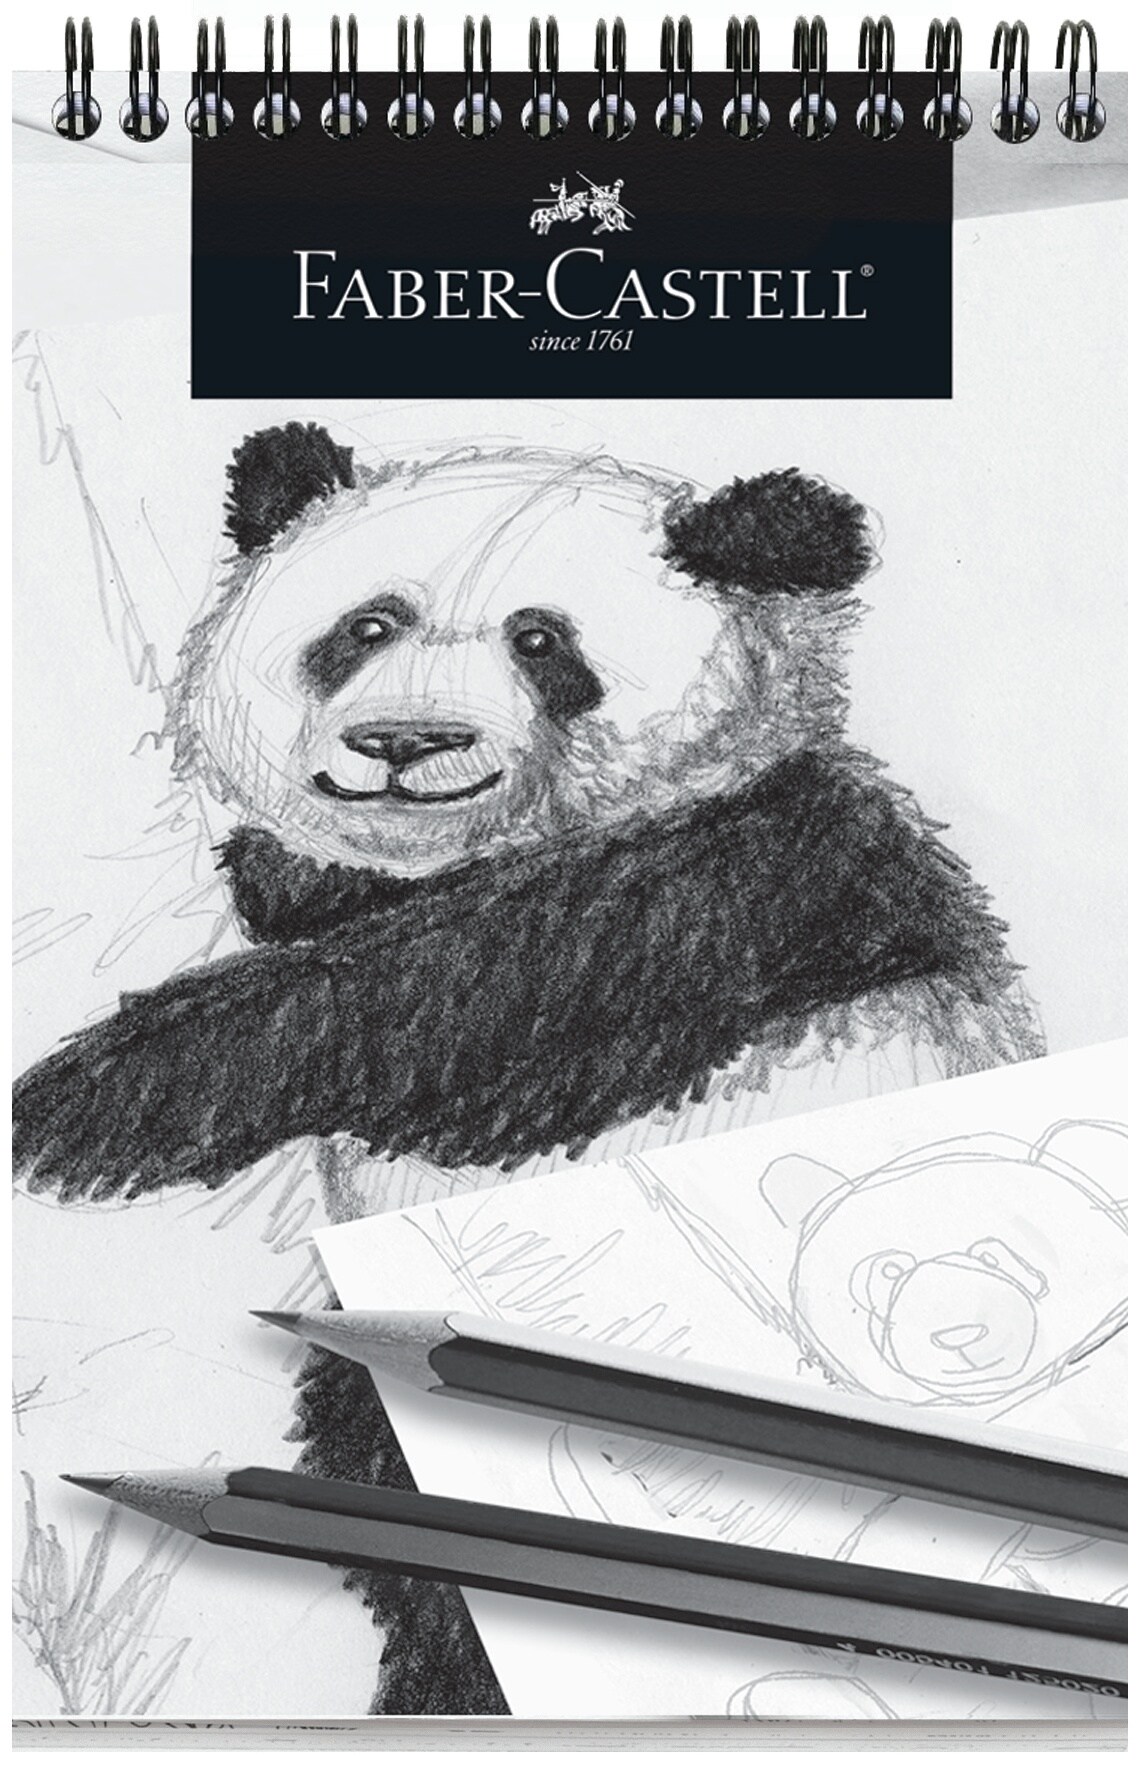 Top 10 Best Drawing Books For Absolute Beginners